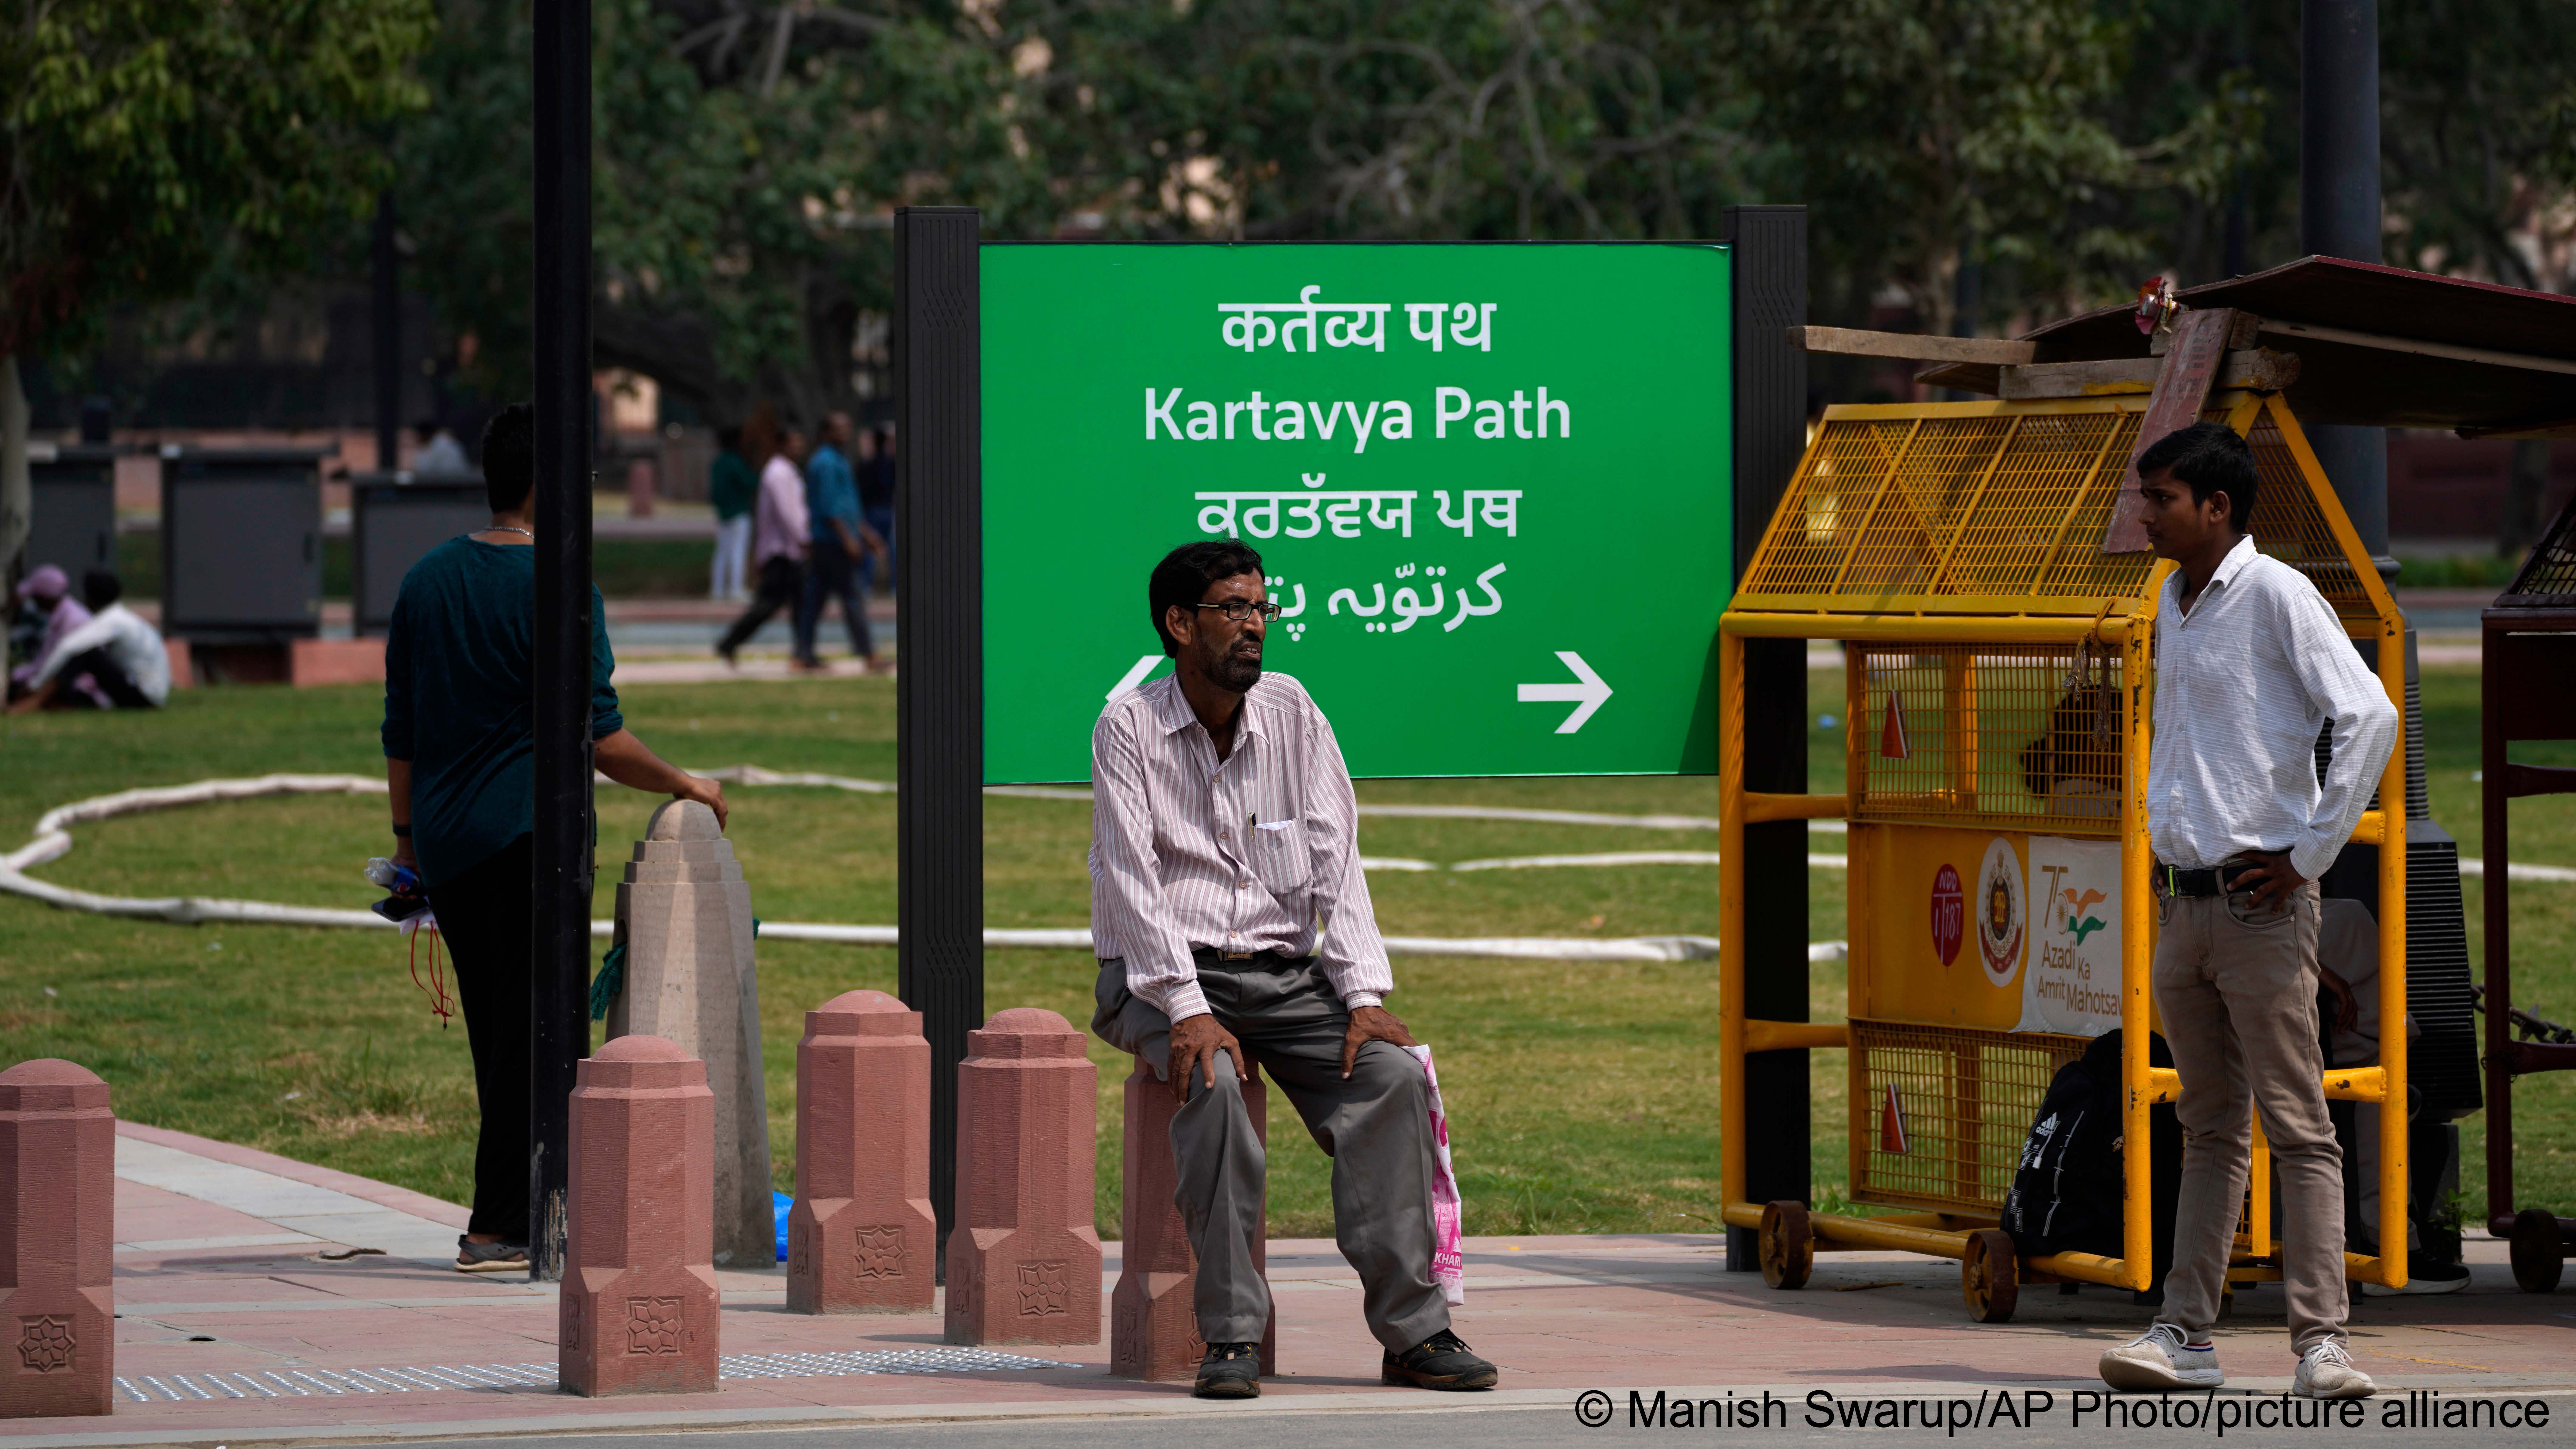 A man rests on a newly constructed pillar in front of a road signage which is changed from Rajpath to Kartavya Path, in New Delhi, 11 September 2022 (photo: AP Photo/Manish Swarup)